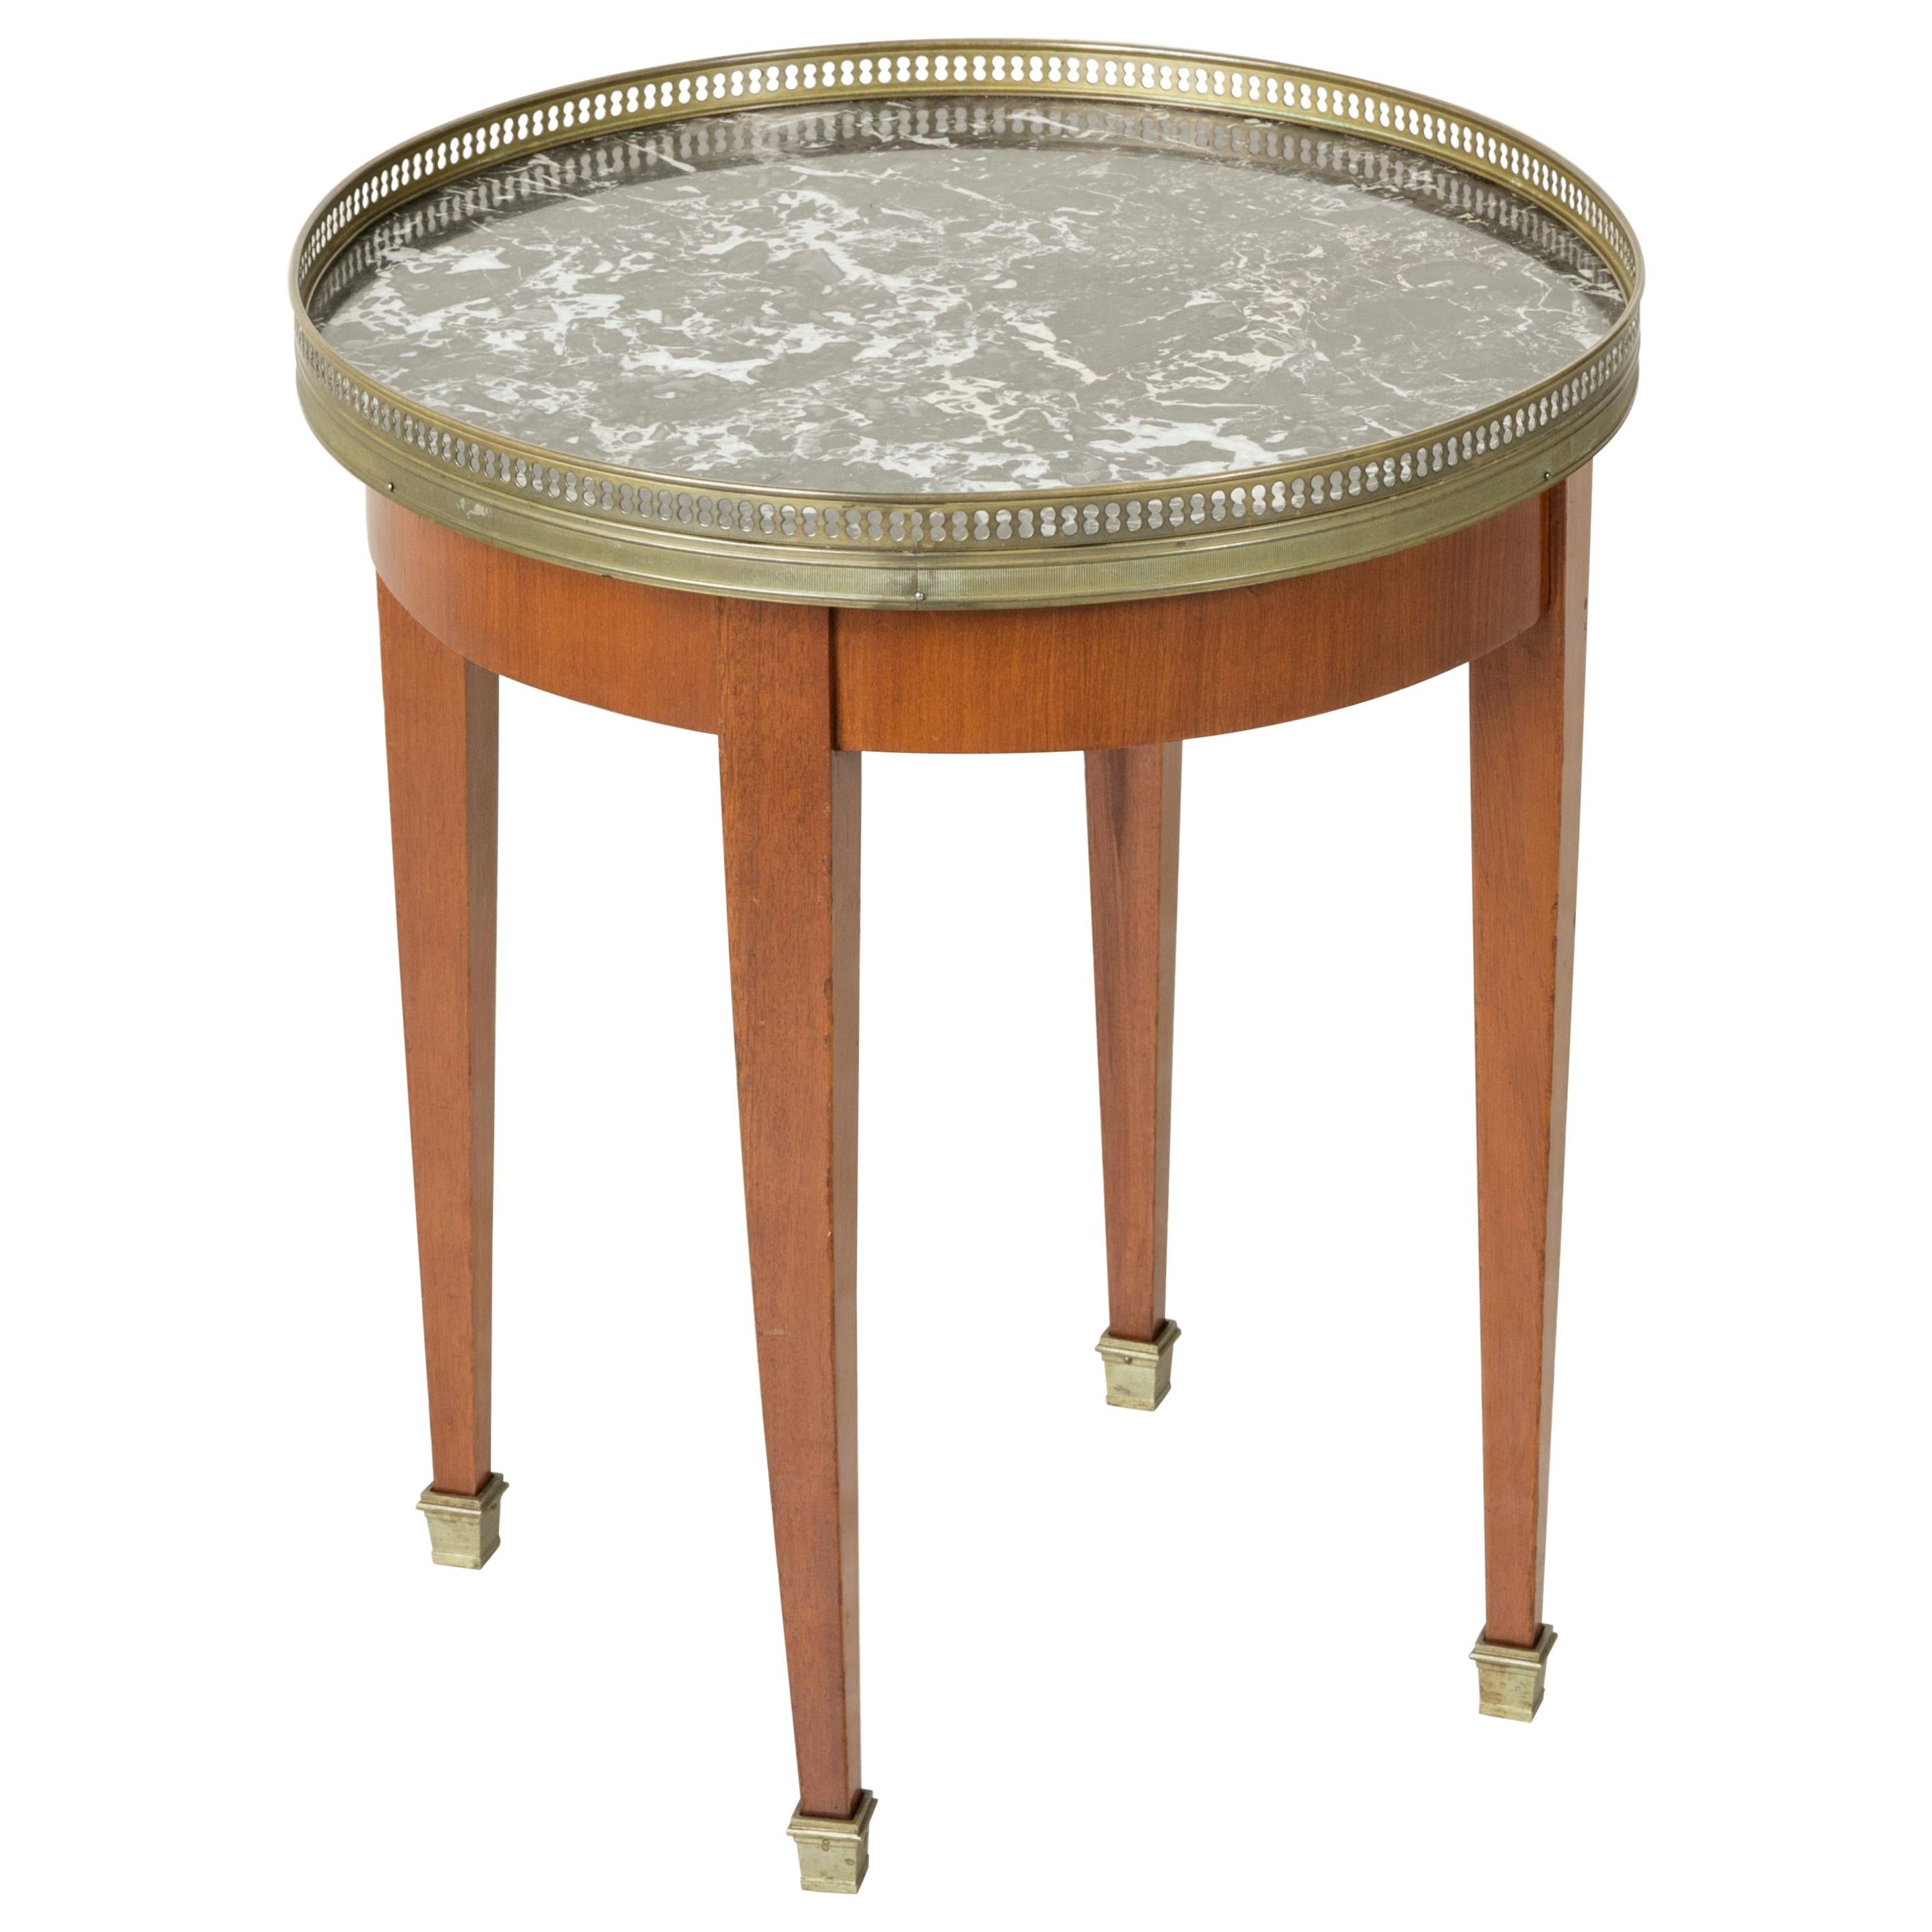 Mid-20th Century French Louis XVI Cherrywood Side Table with Marble Top, Brass